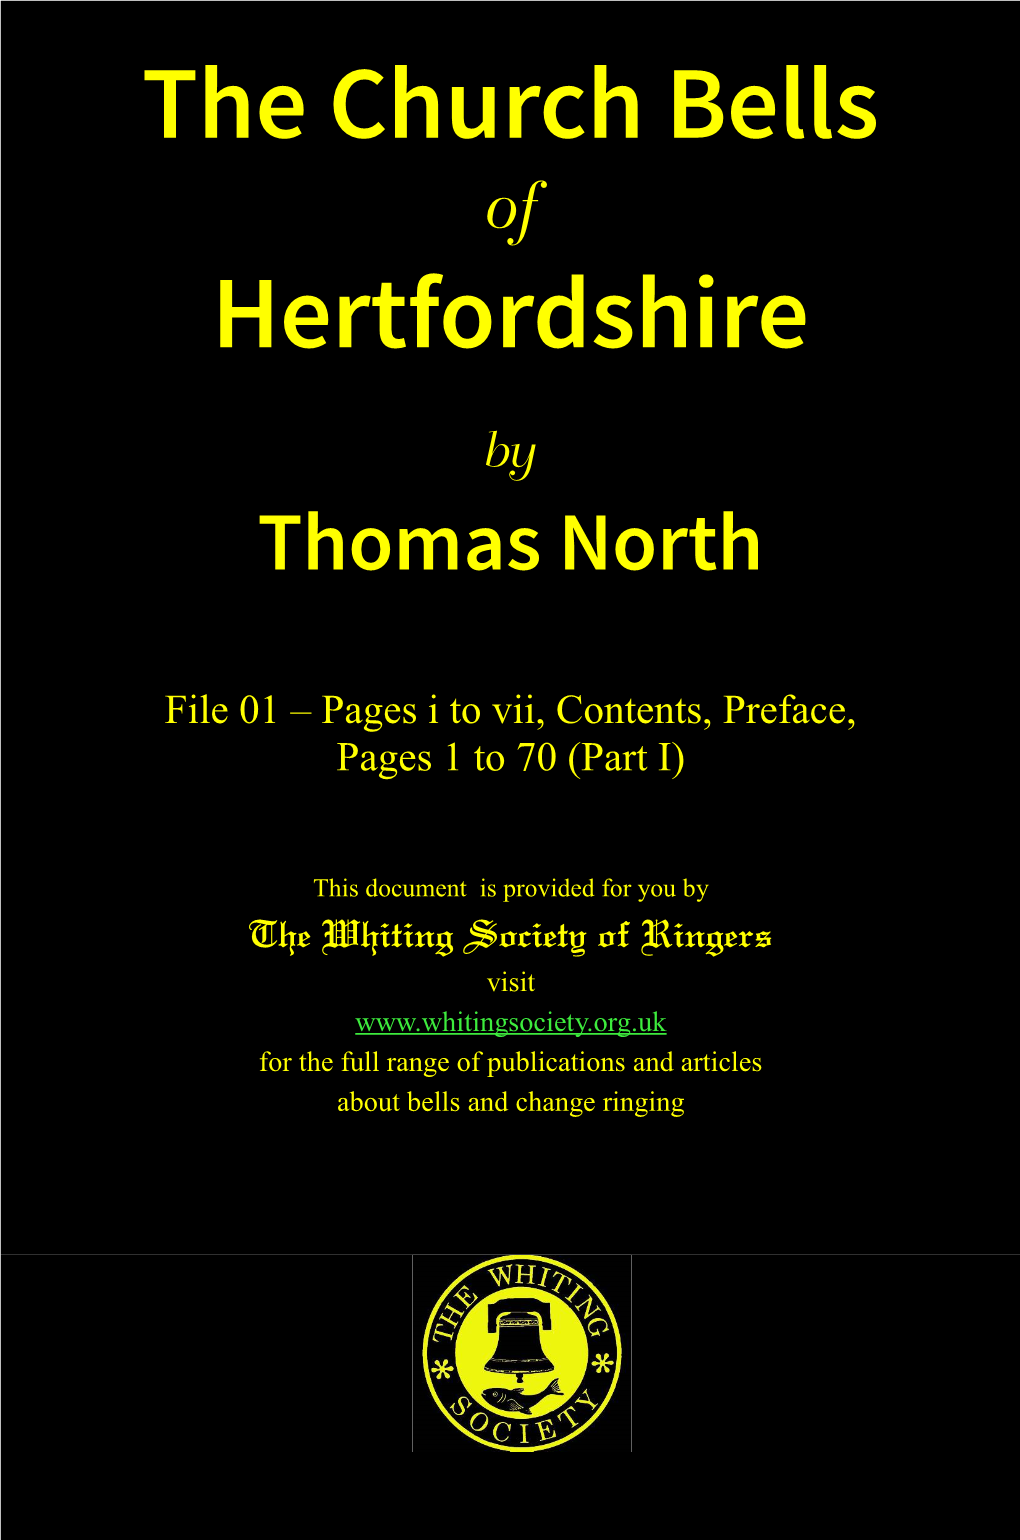 The Church Bells of Hertfordshire by Thomas North